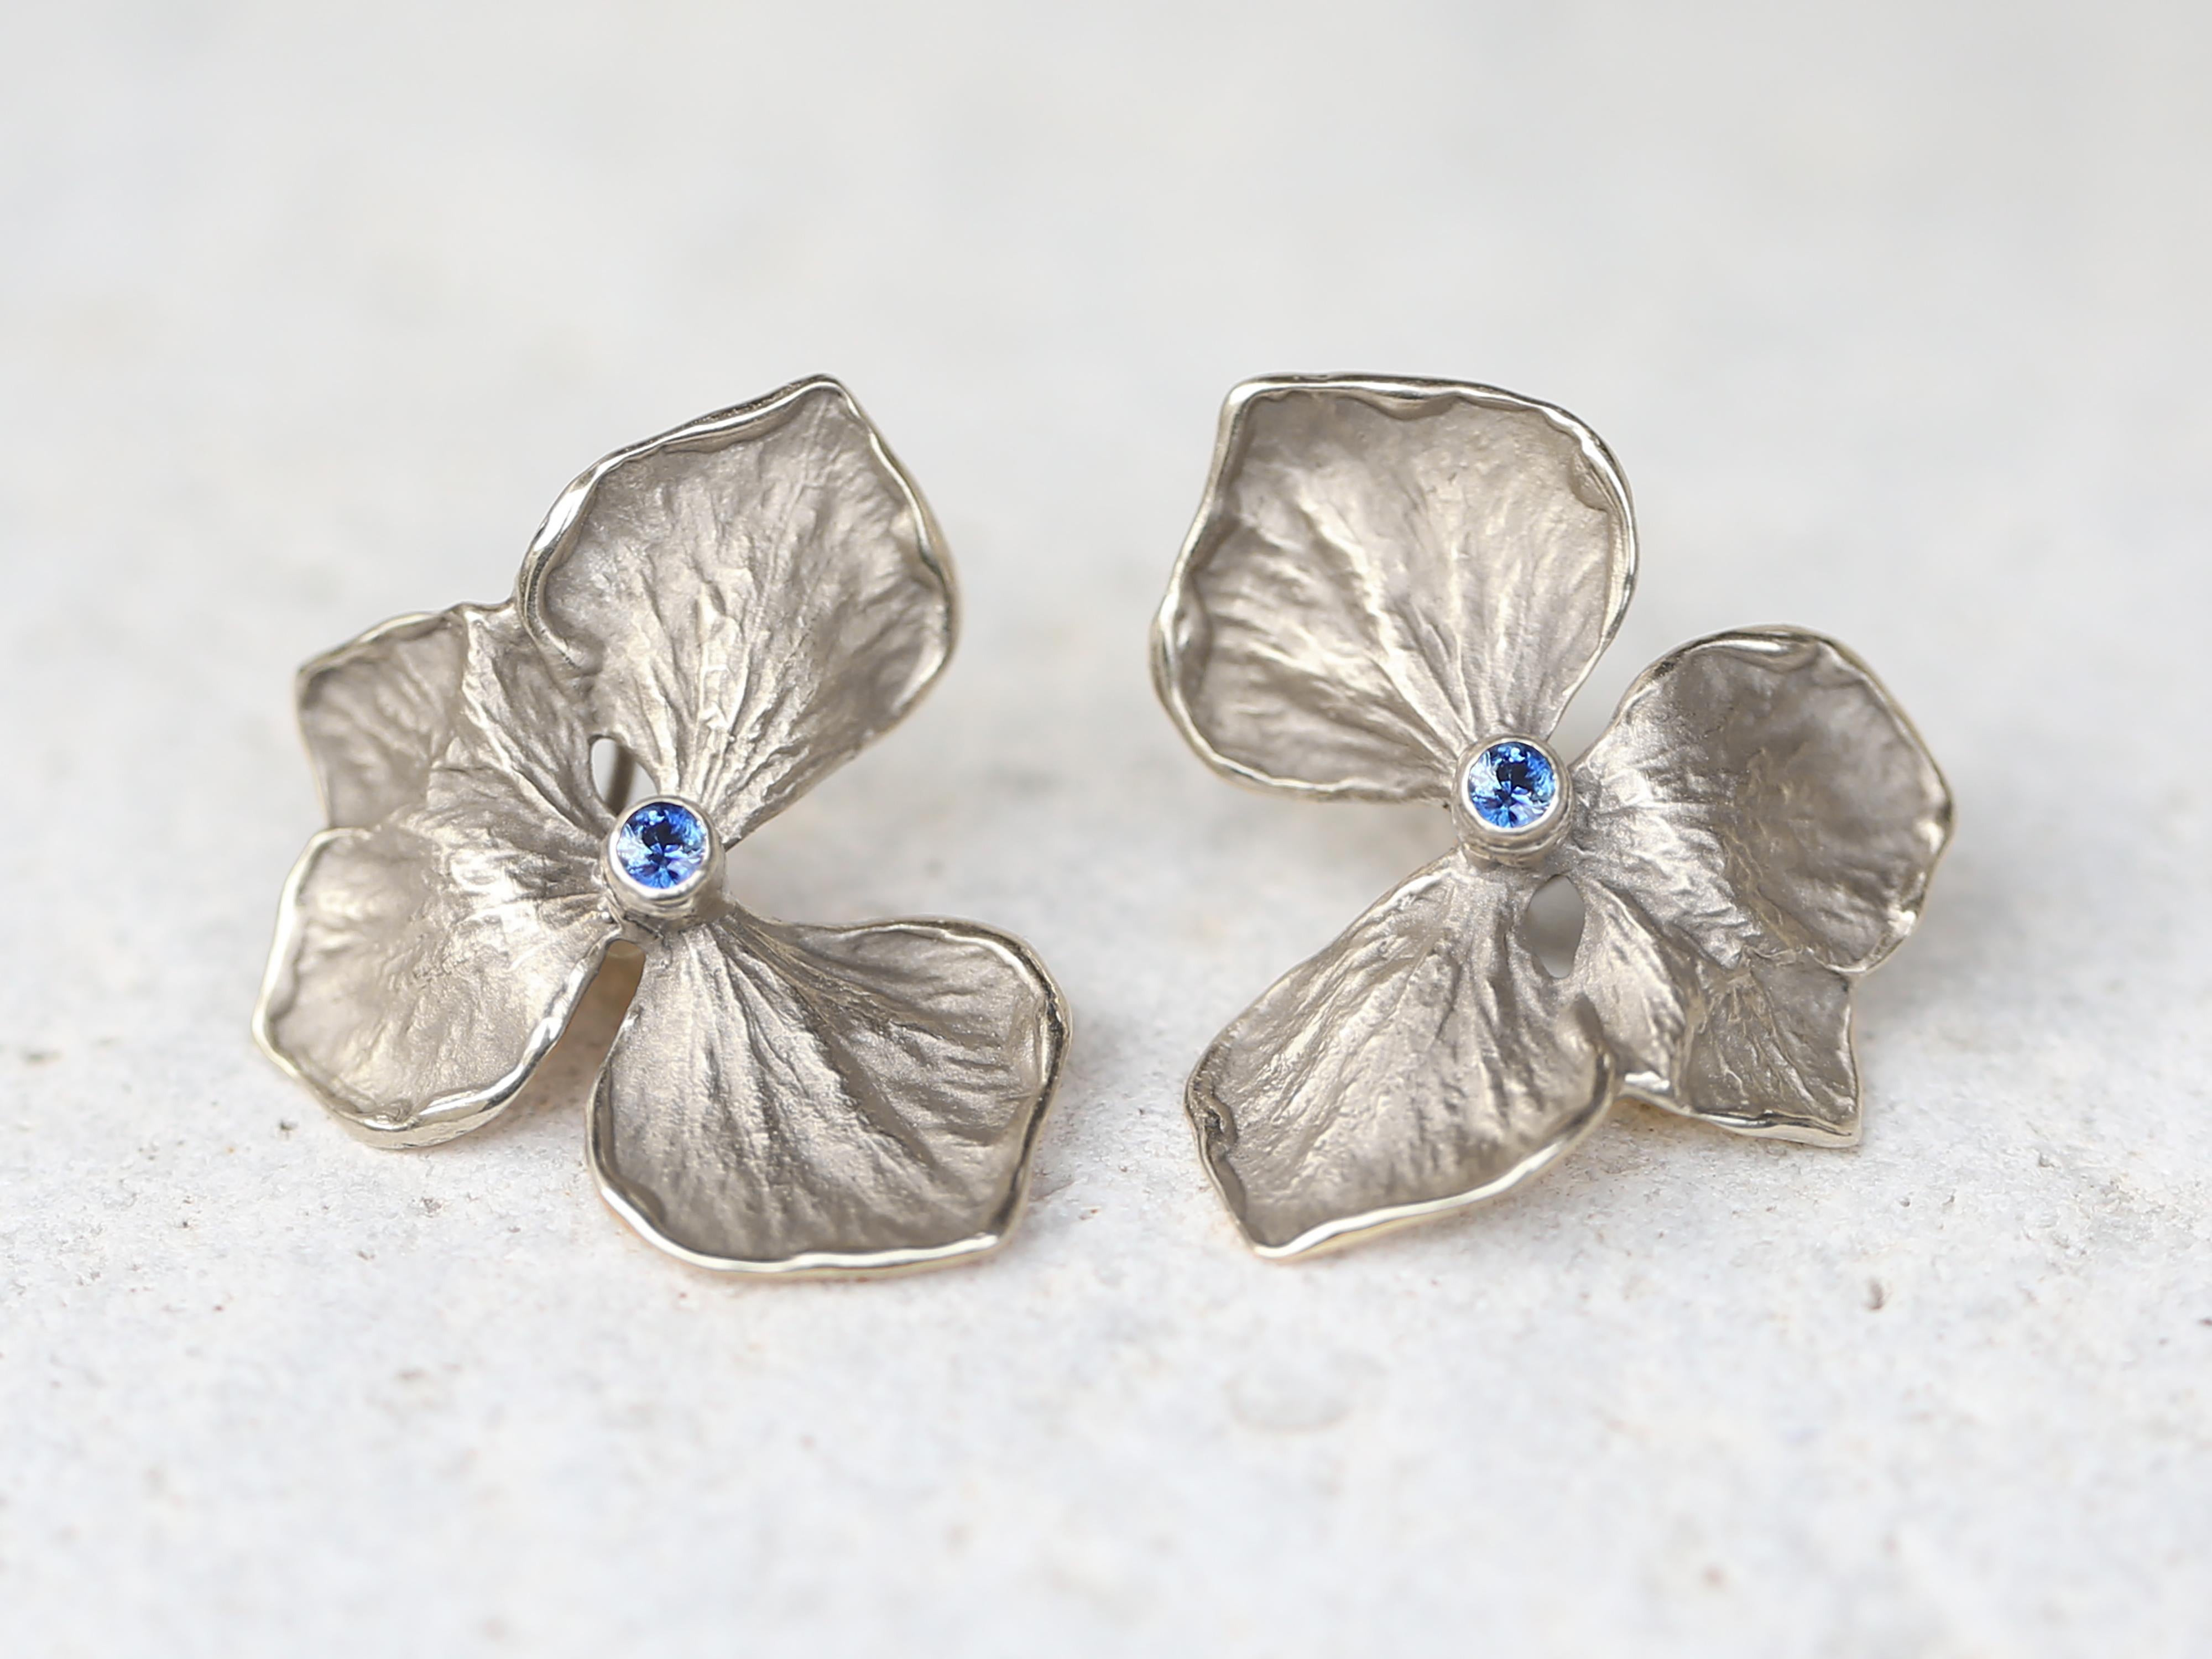 Large Solid White Gold Hydrangea Flower Earrings

These unique earrings are made having a hydrangea flower as a source of inspiration. Each flower is crafted in wax and then cast in gold.

Materials: Flower and Omega Clip: Solid 14k Gold
Size